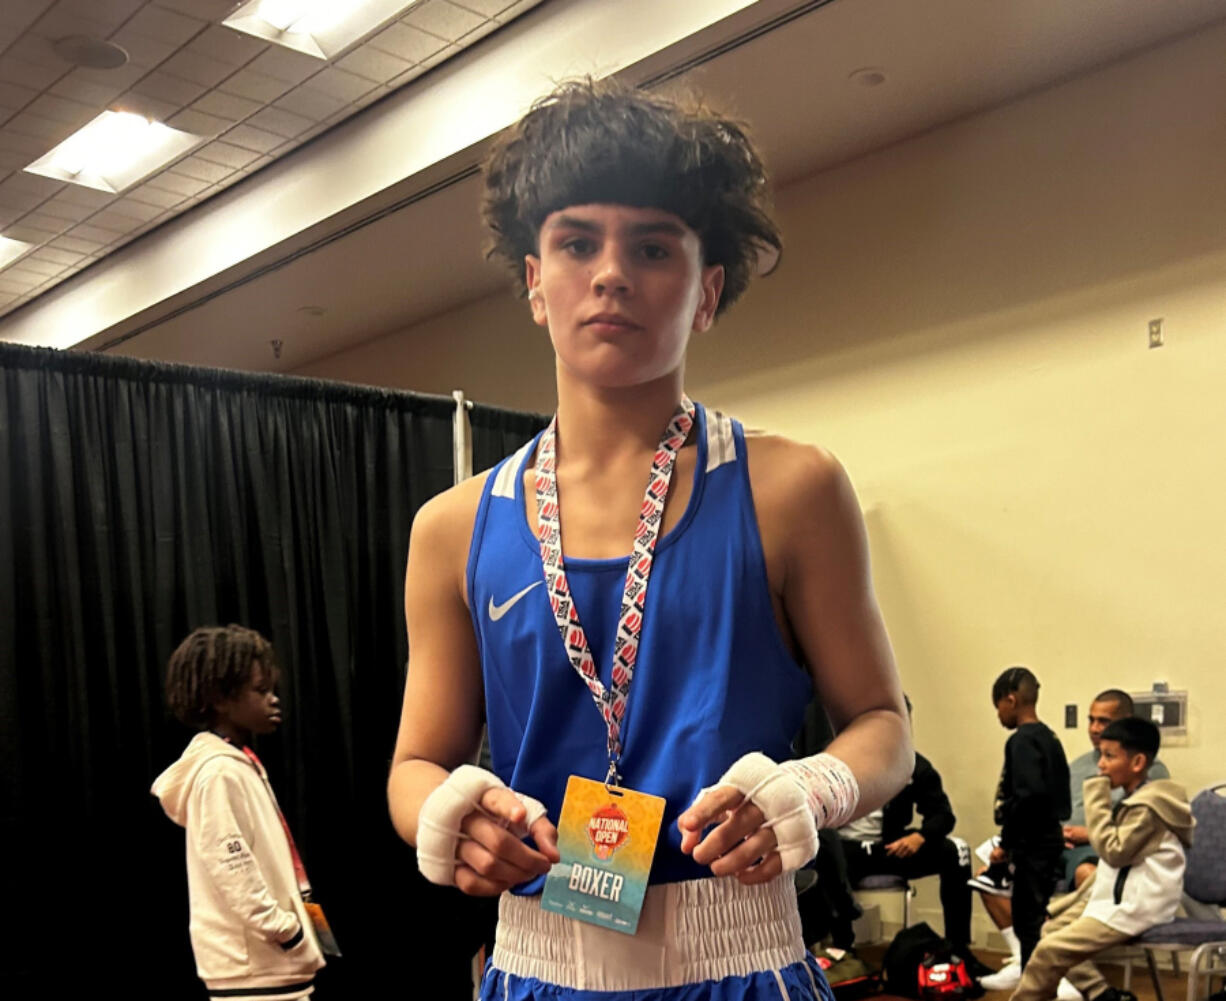 Vancouver&rsquo;s Cain Elizondo Jr., 14, reached No. 1 in USA Boxing&rsquo;s national rankings for 13-14 year olds after winning the 125-pound weight class at a national-level tournament in Albaquerque, N.M., earlier this month.